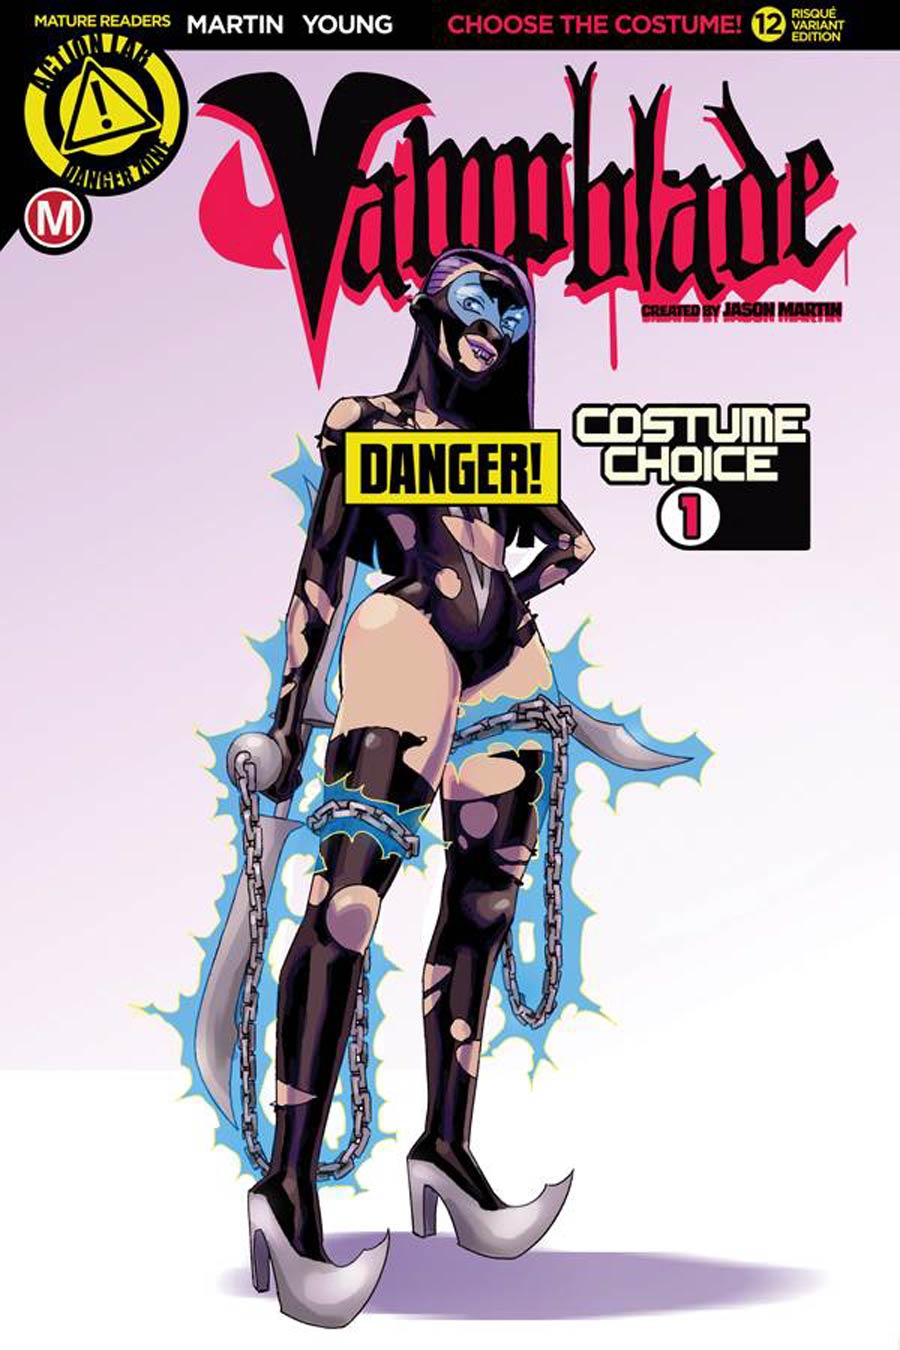 Vampblade #12 Cover D Variant Costume Choice 1 Risque Cover